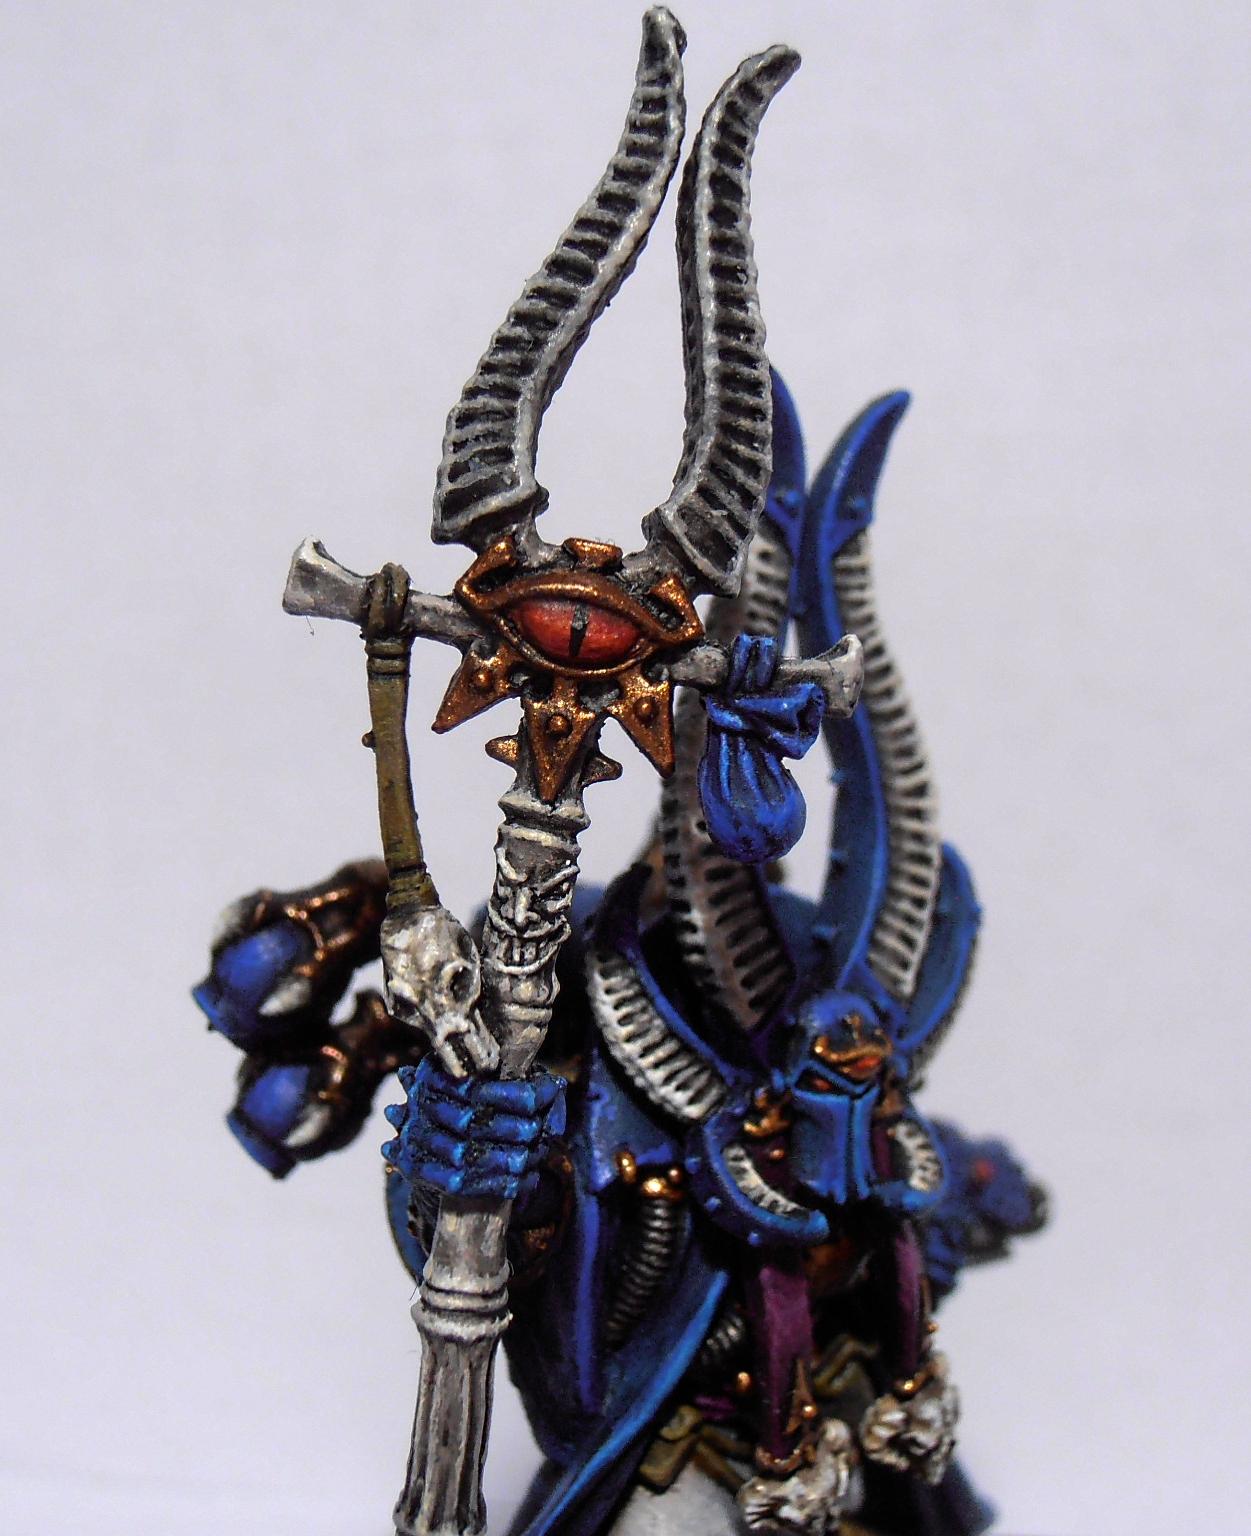 Ahriman, Ahriman of the Thousand Sons